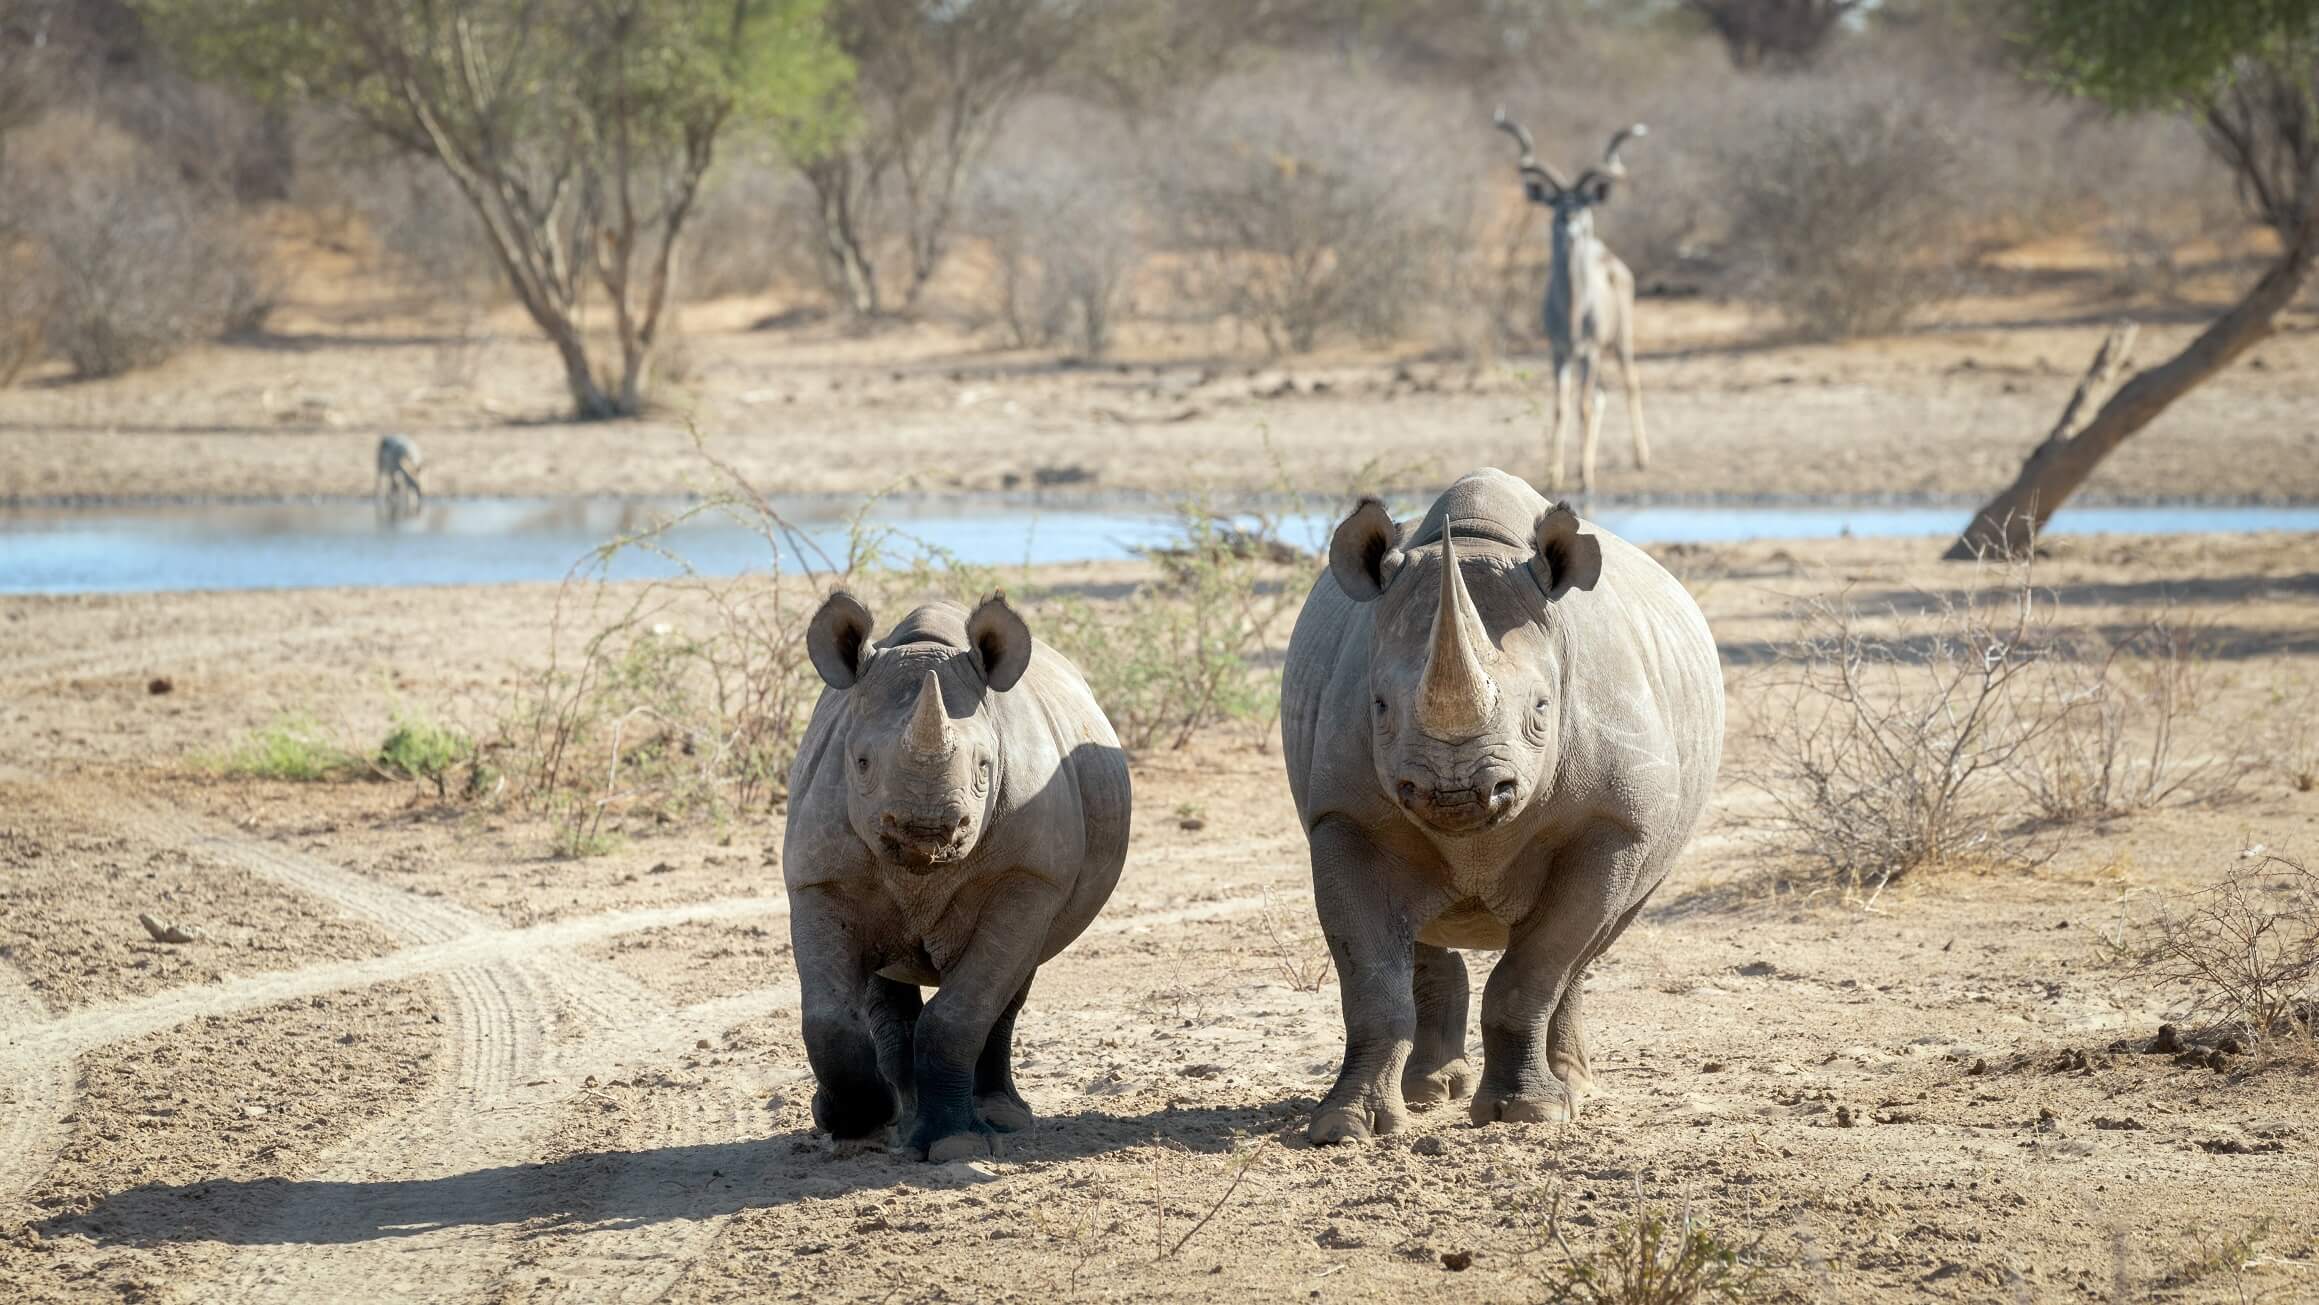 Saving rhinos on this conservation safari in south africa